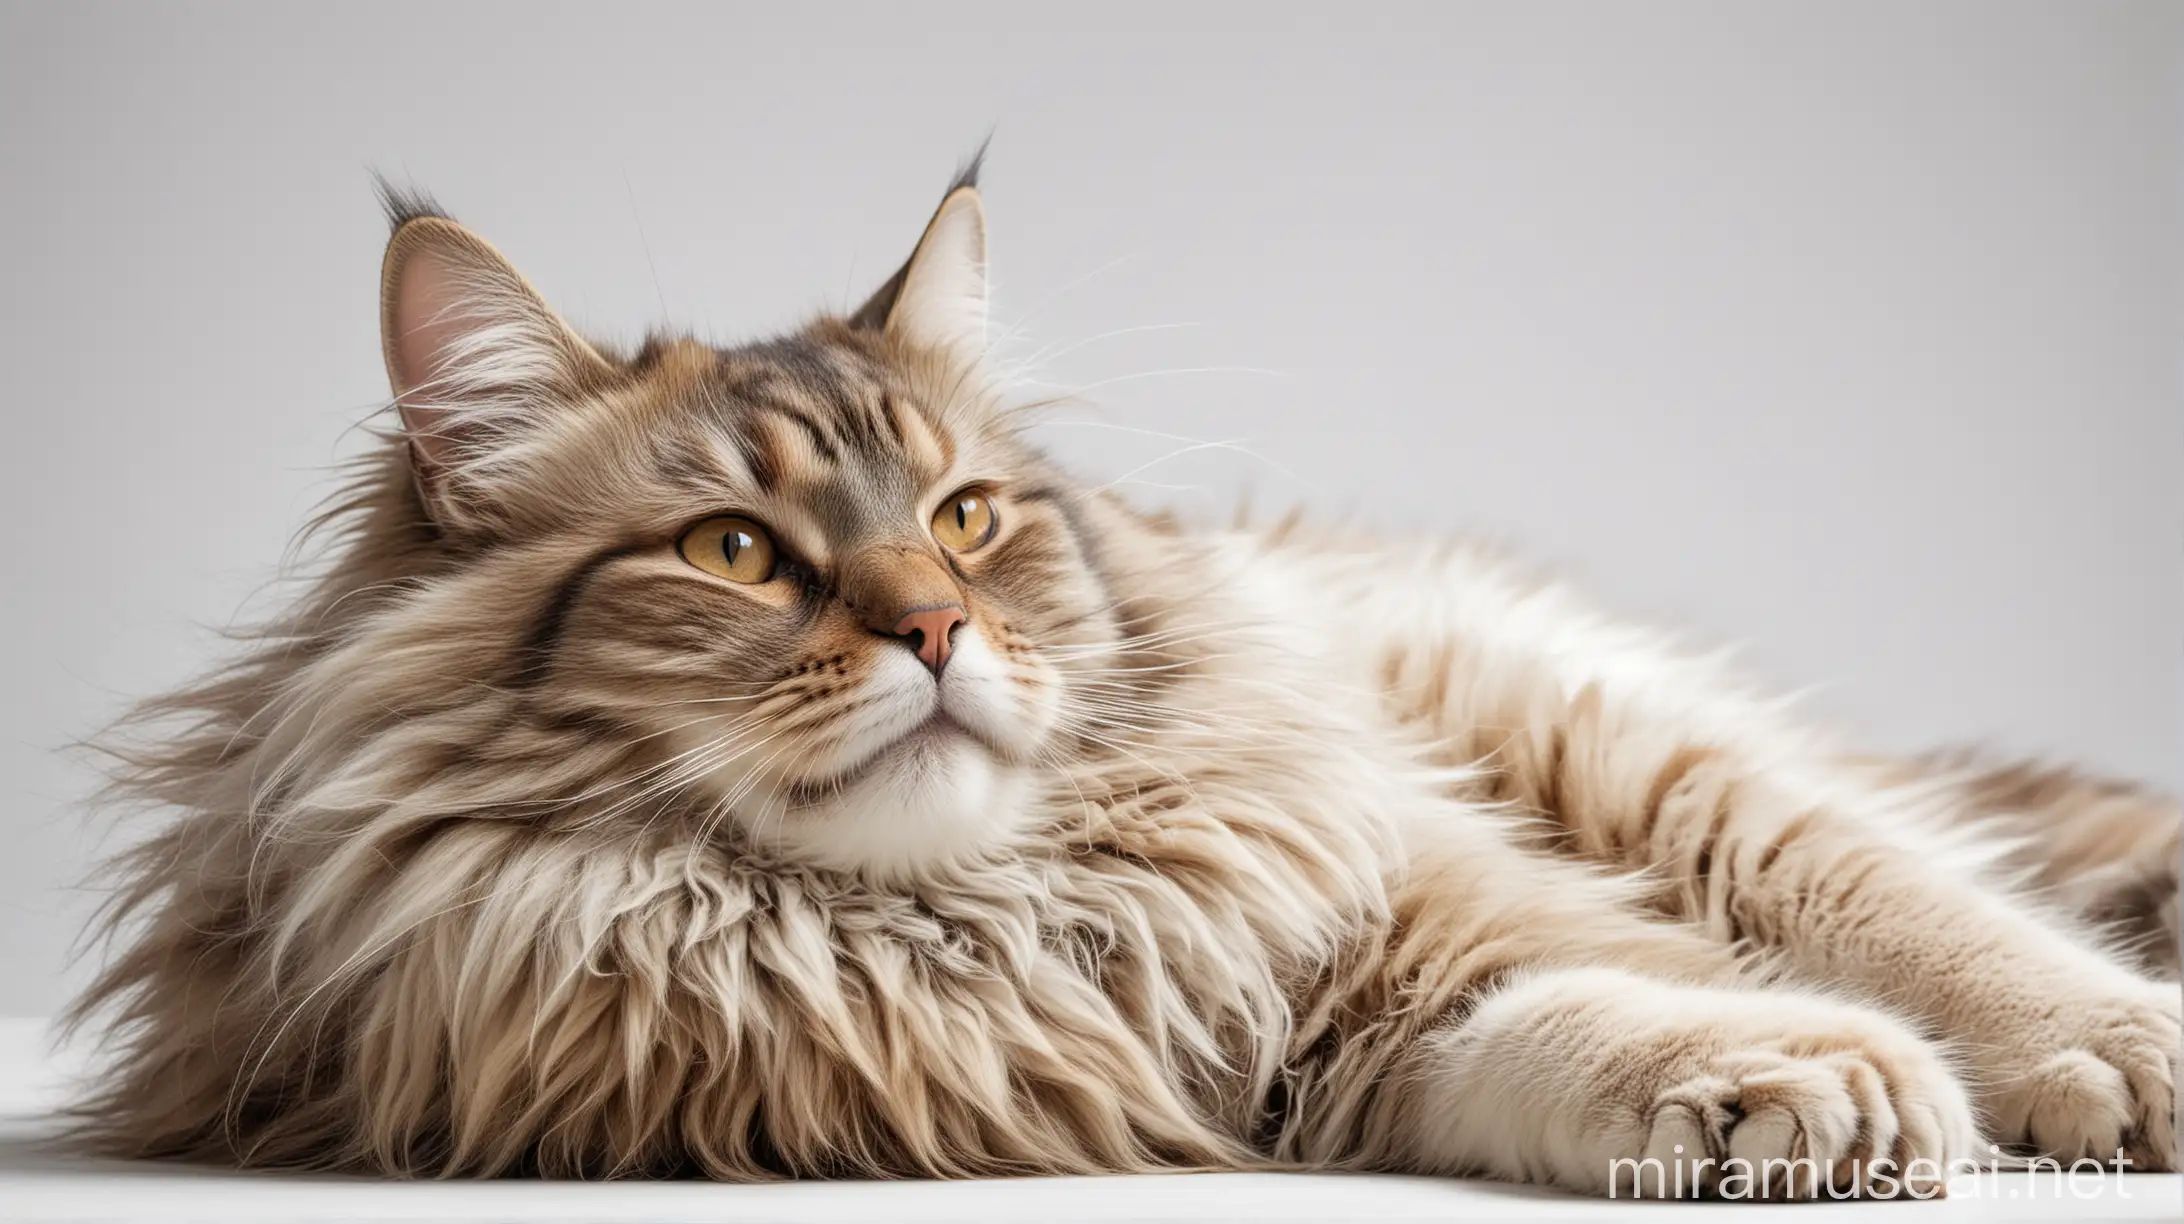 Create a focused view of a relaxed cat lying down, with every detail of its fur and expression clearly visible against a white background